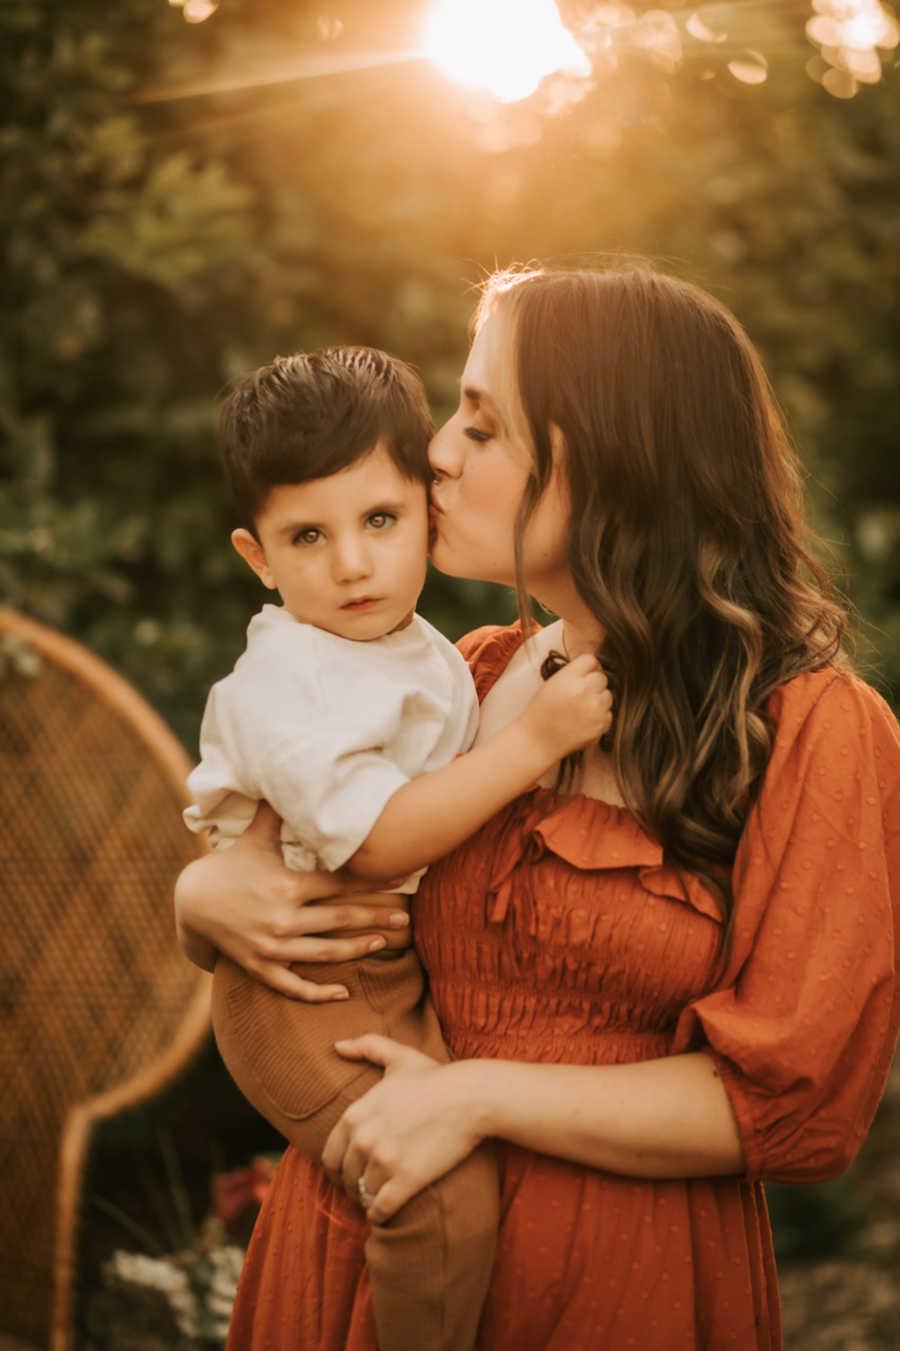 Eliza Moody with her son, Tobias Lugo, who was born with Moebius syndrome. (Courtesy of Daliela Photography via <a href="https://www.facebook.com/Tobiass-Journey-2637133076510838/">Eliza Moody</a>)